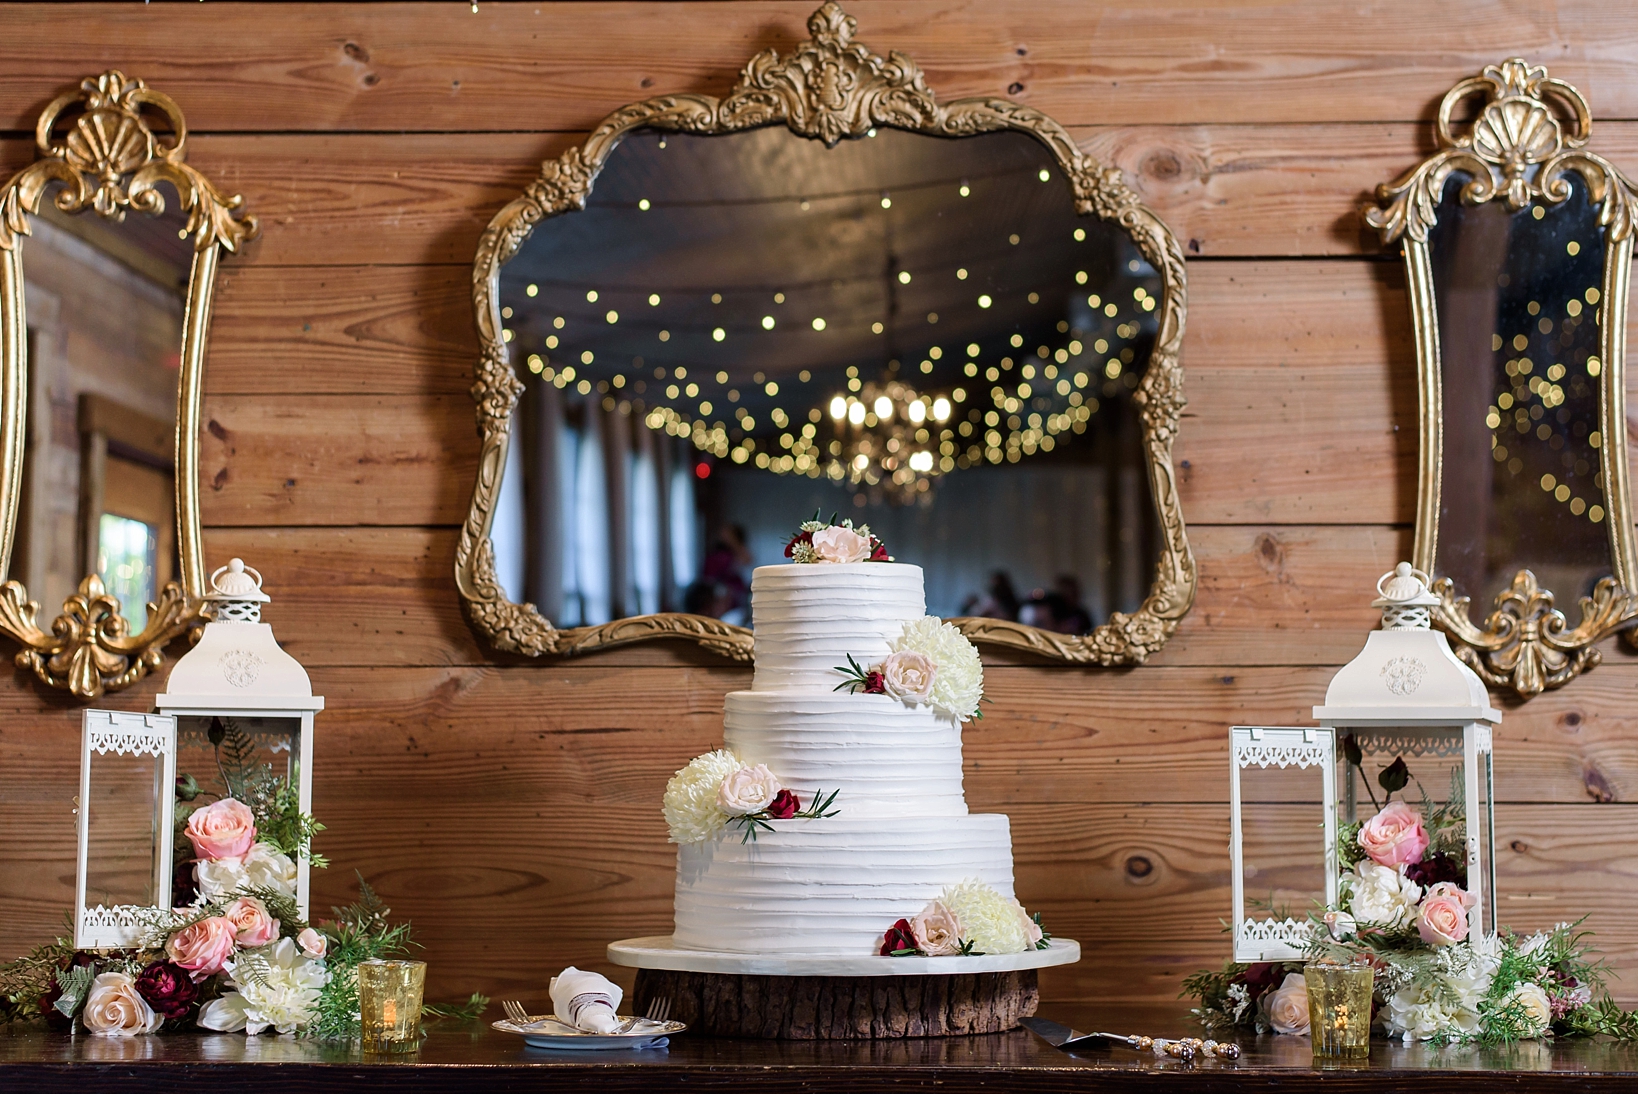 The wedding cake surrounded by reflecting mirrors and string lights with pops of floral accents